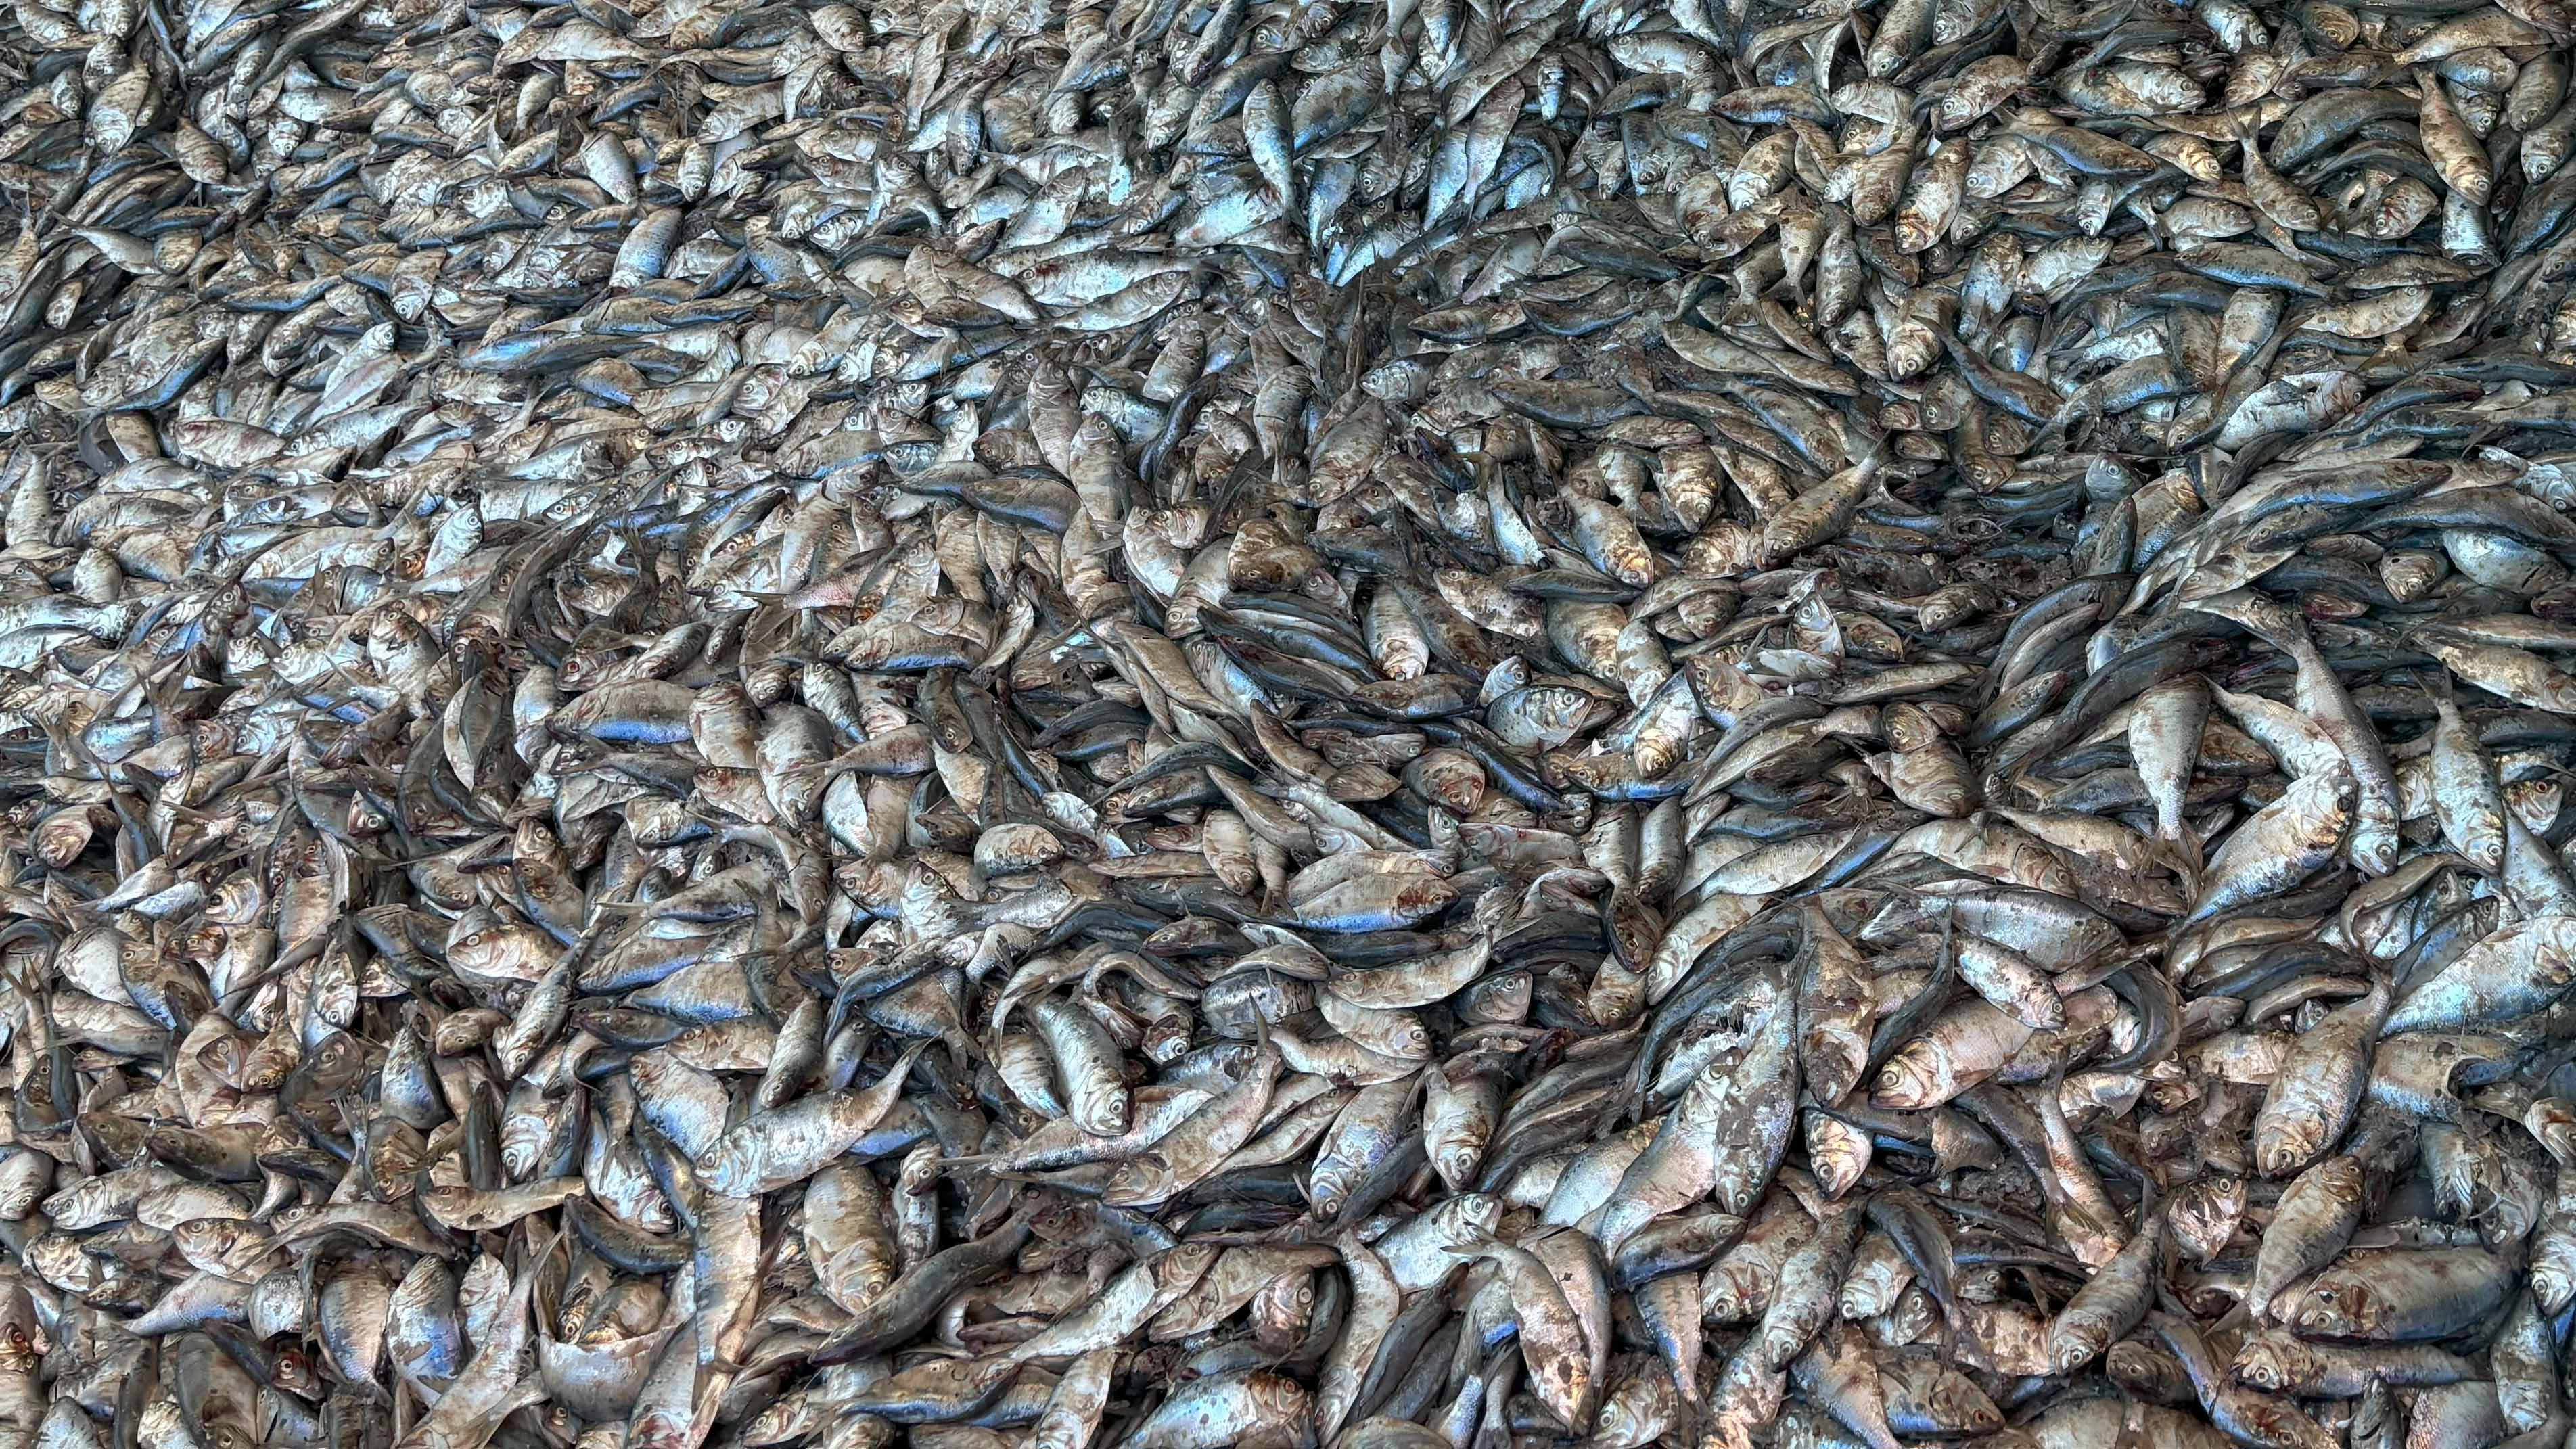 Menhaden in a holding bin at Omega Protein’s reduction plant in Reedville. (Photo by Katherine Hafner)